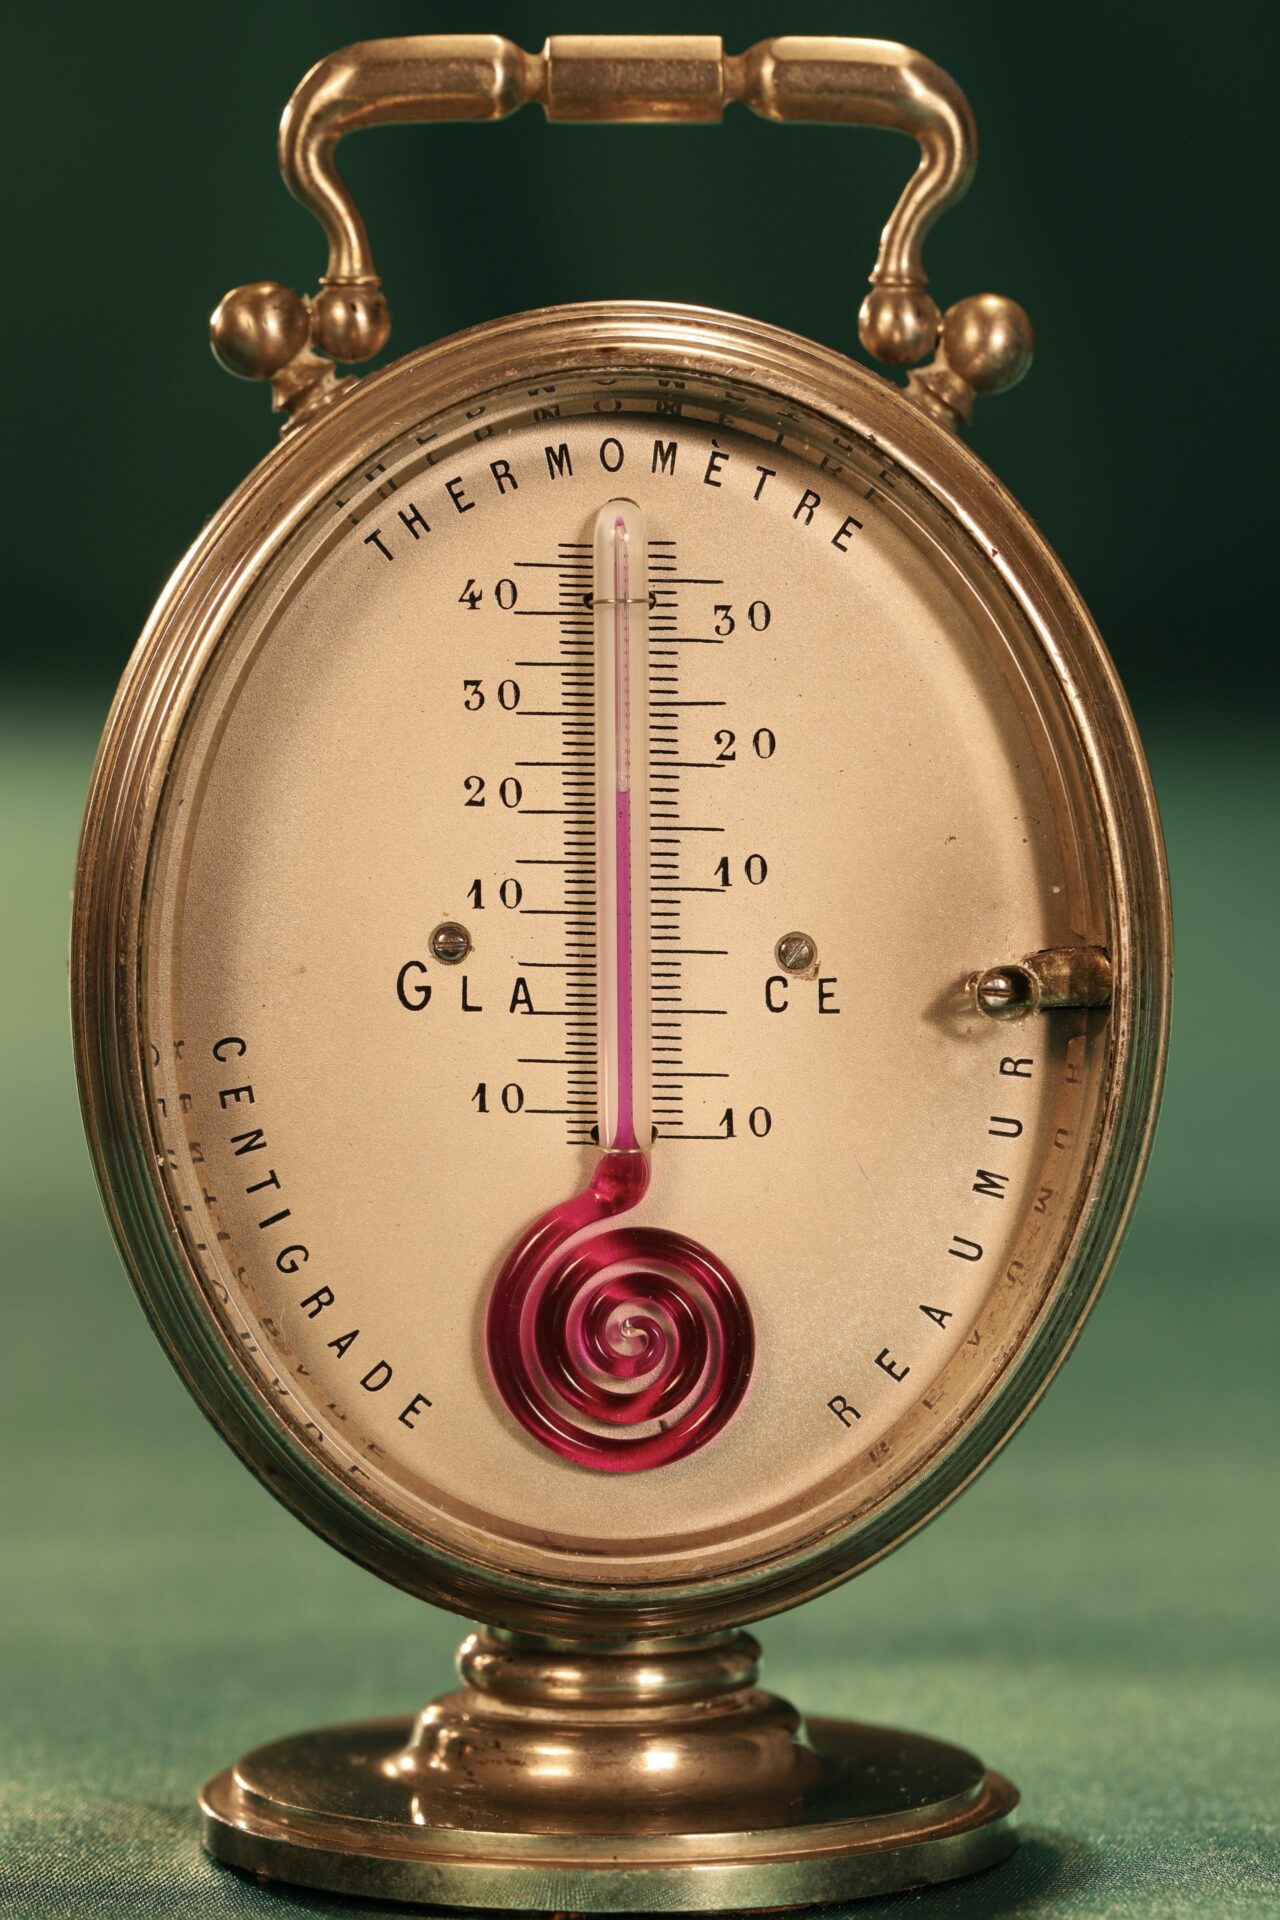 Image of Redier Travel Compendium showing the Thermometer Side c1880